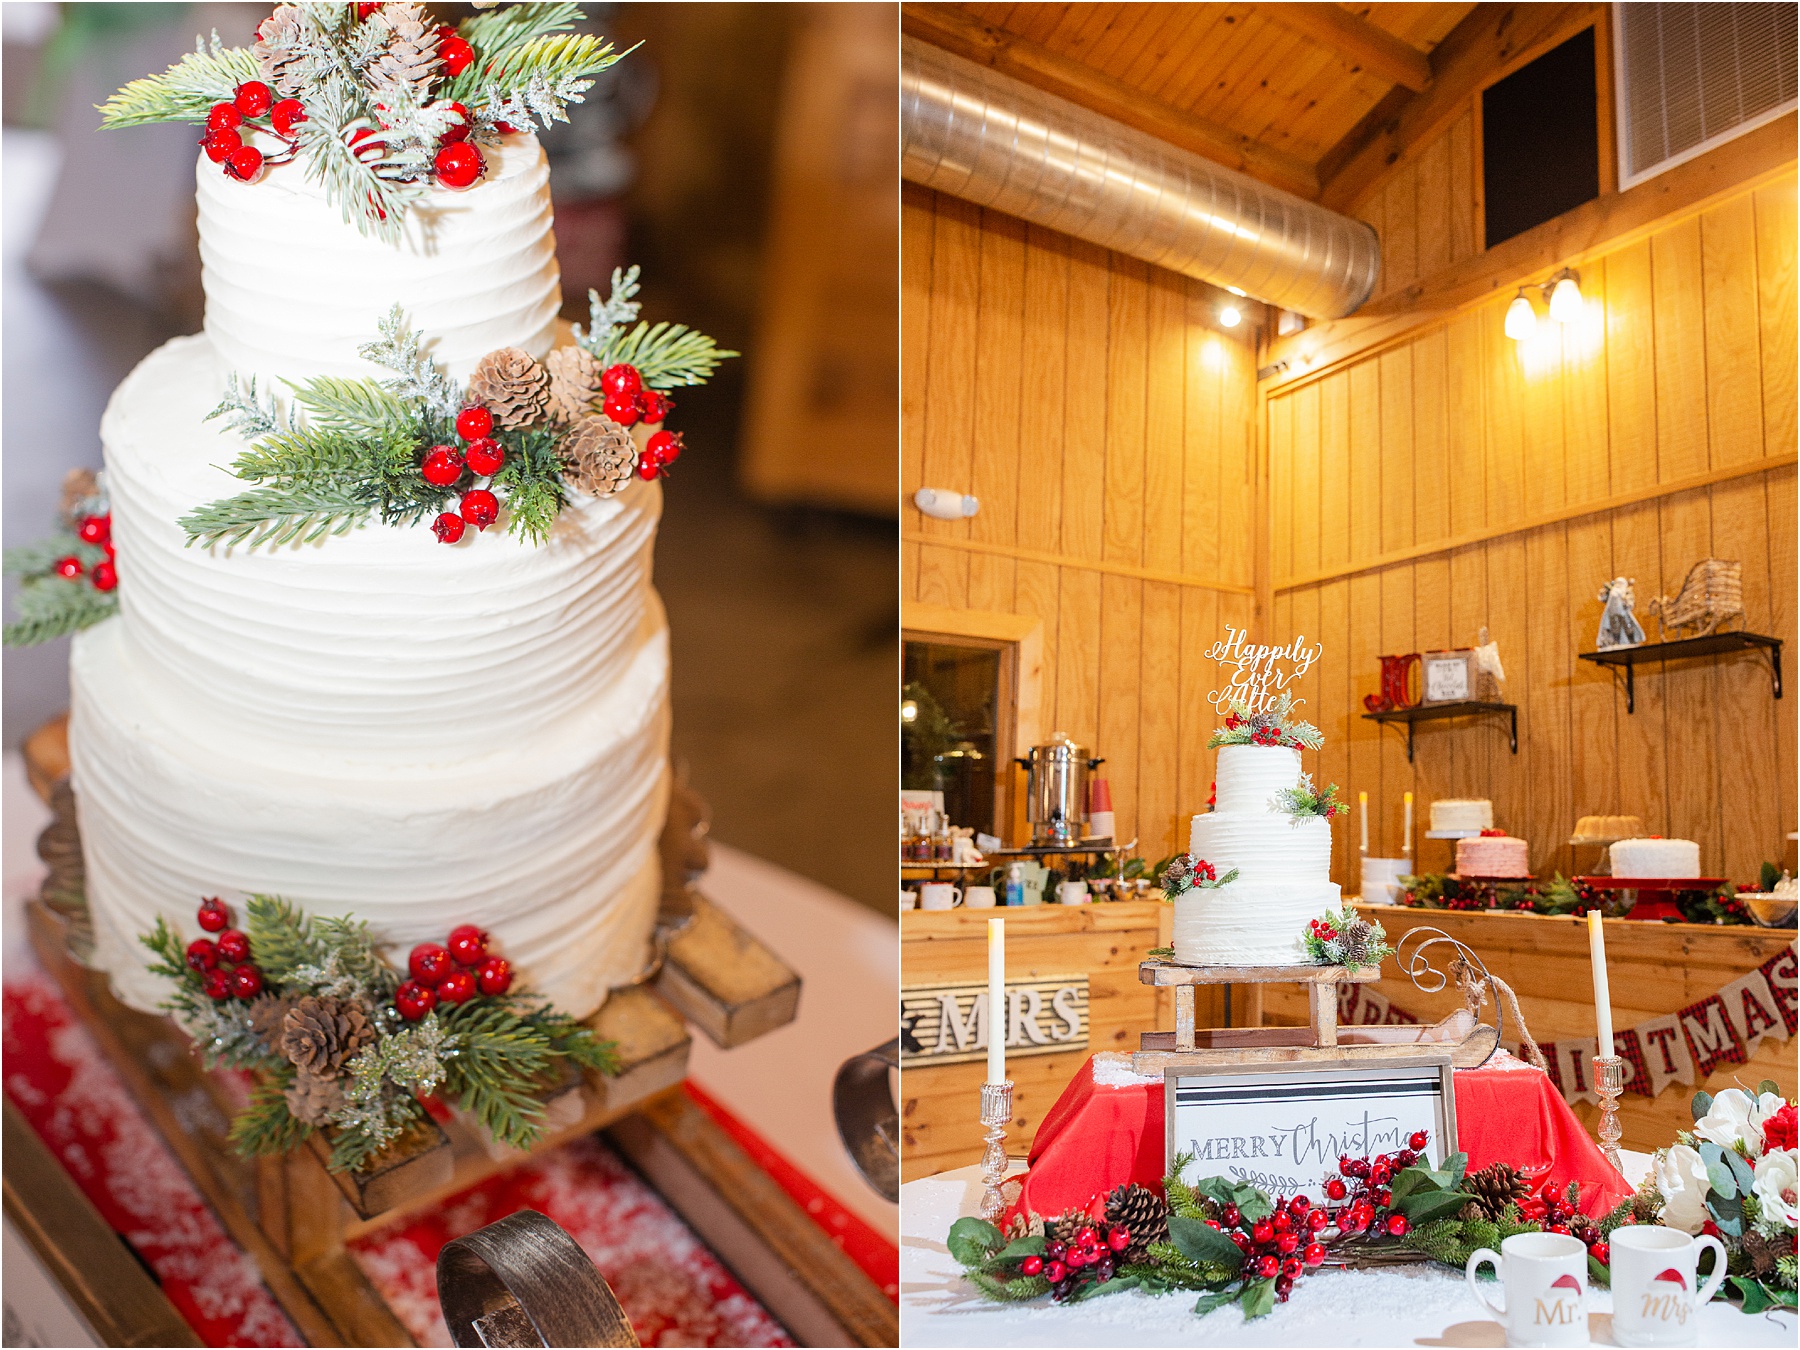 Christmas wedding cake with pinecones and holly berries